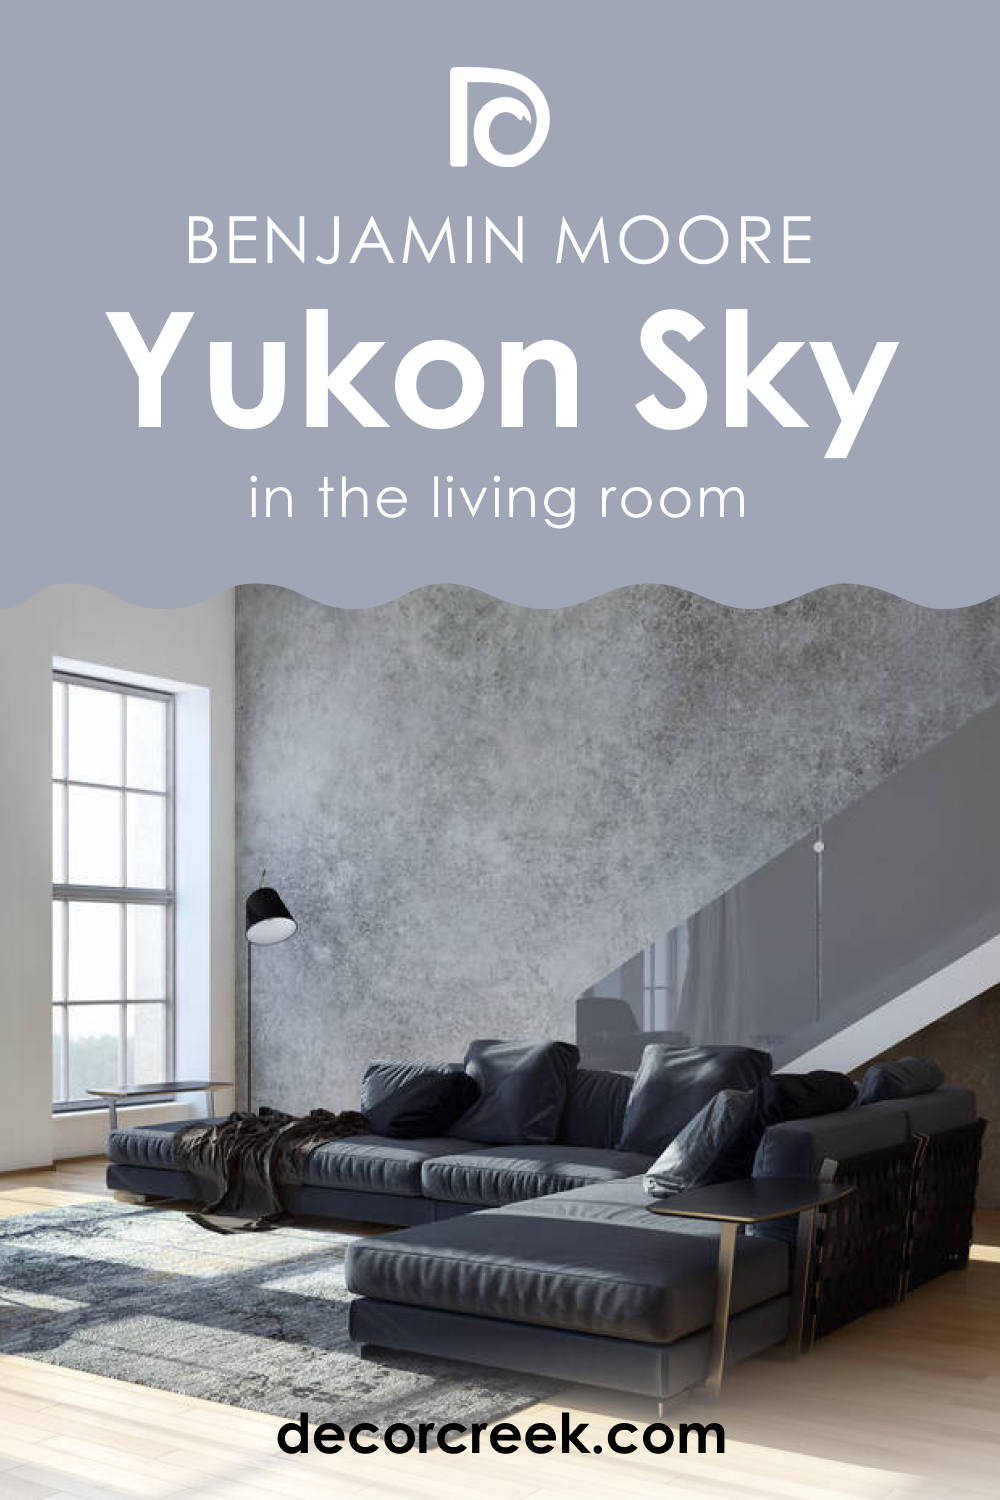 How to Use Yukon Sky 1439 in the Living Room?